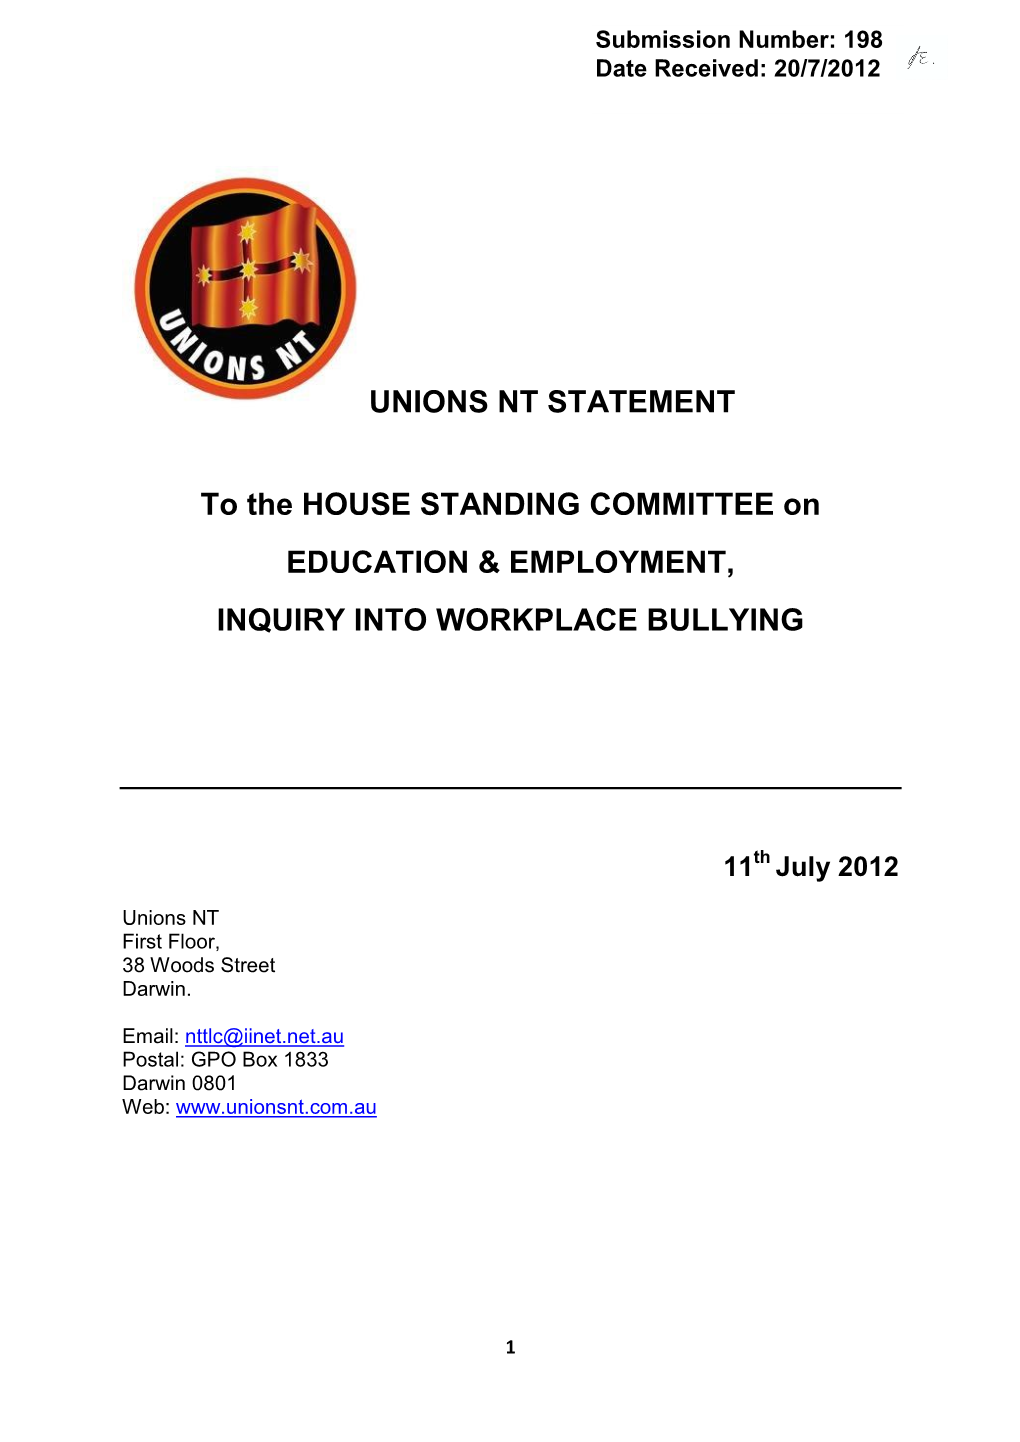 UNIONS NT STATEMENT to the HOUSE STANDING COMMITTEE